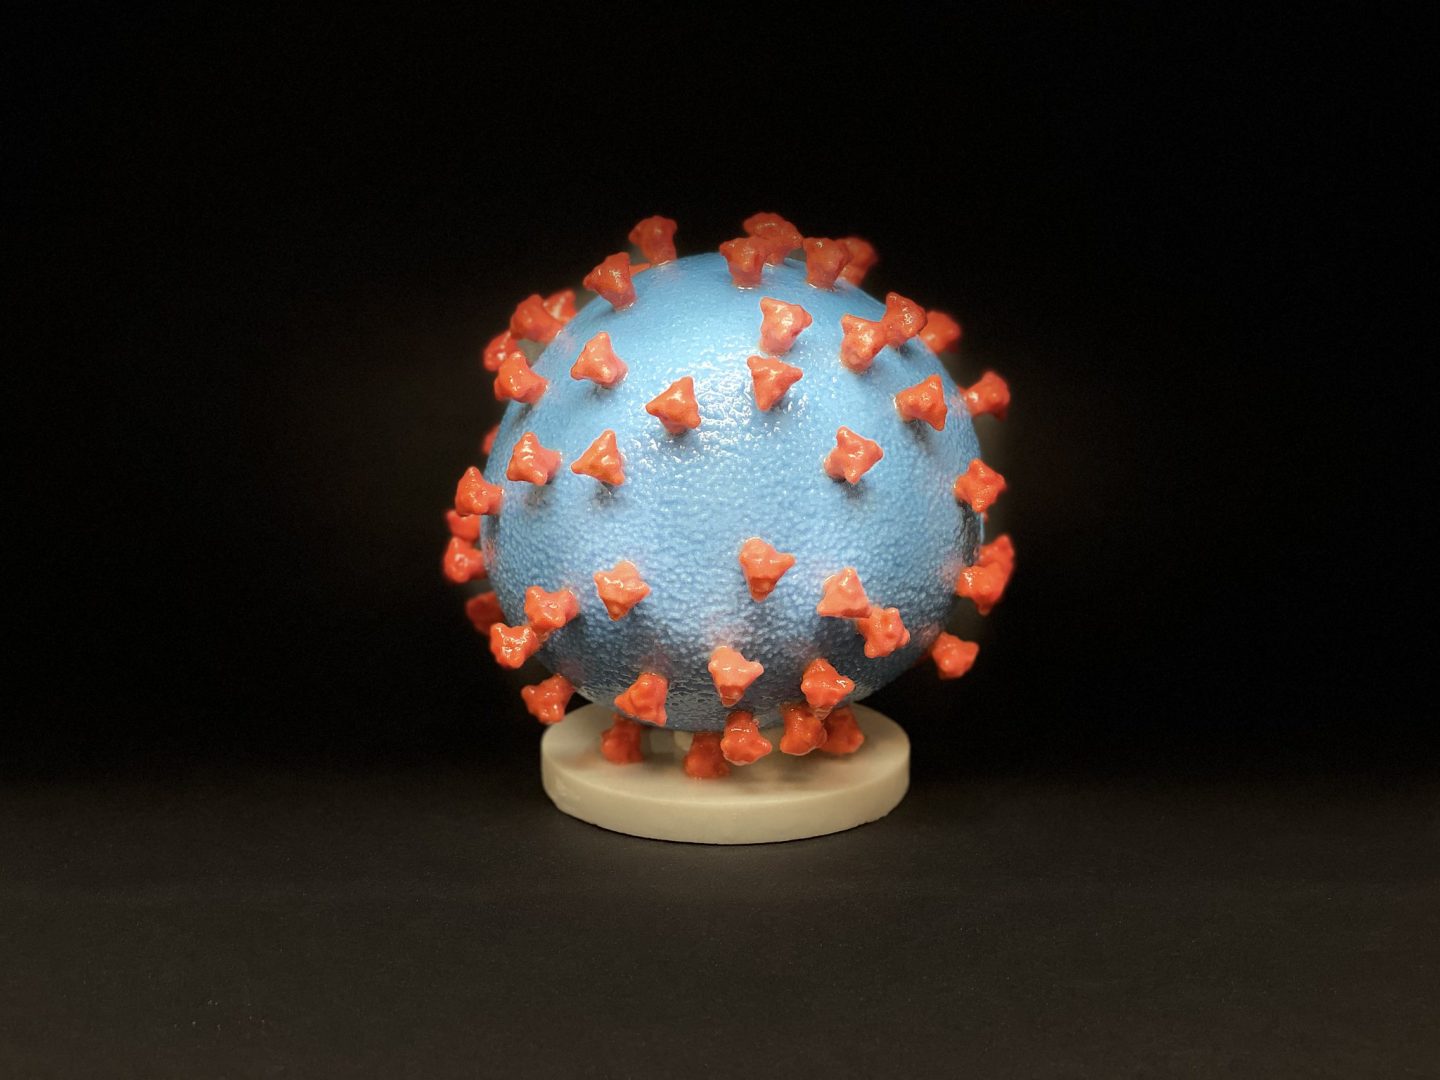 3D print of a SARS-CoV-2—also known as 2019-nCoV, the virus that causes COVID-19—virus particle. The virus surface (blue) is covered with spike proteins (red) that enable the virus to enter and infect human cells.